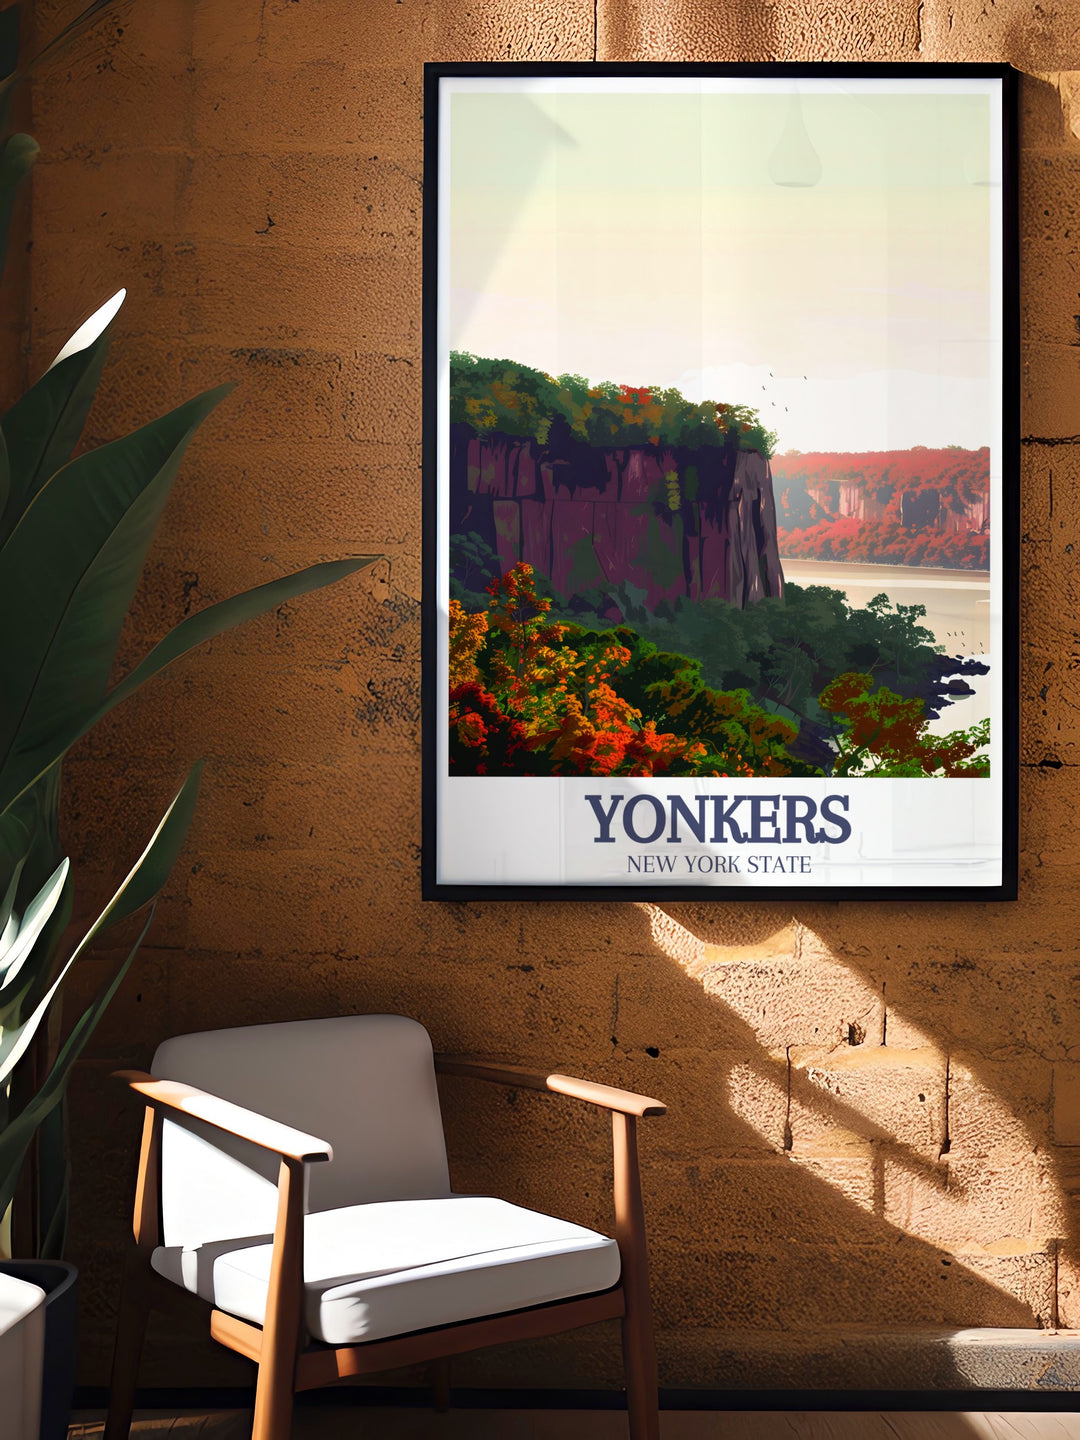 Yonkers photo of Palisades Interstate Park Hudson River offering a blend of vintage and modern aesthetics perfect for wall decor and elegant home decorations